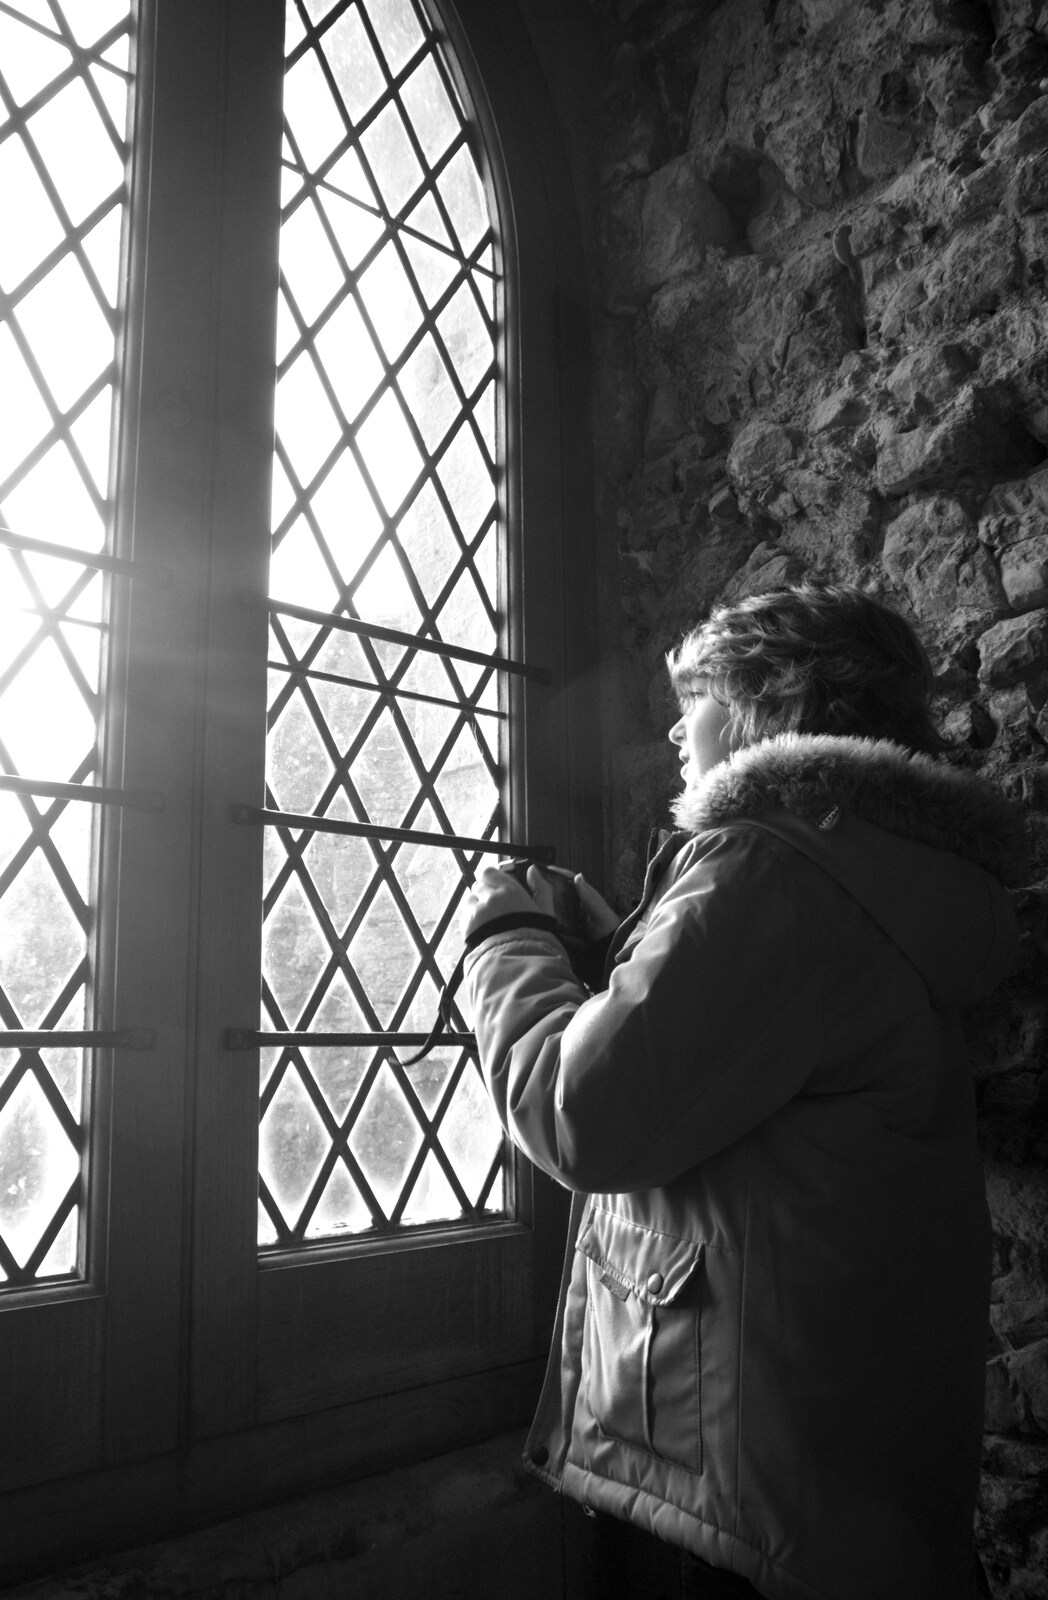 A Trip to Orford, Suffolk - 25th January 2020: Another window, another photo